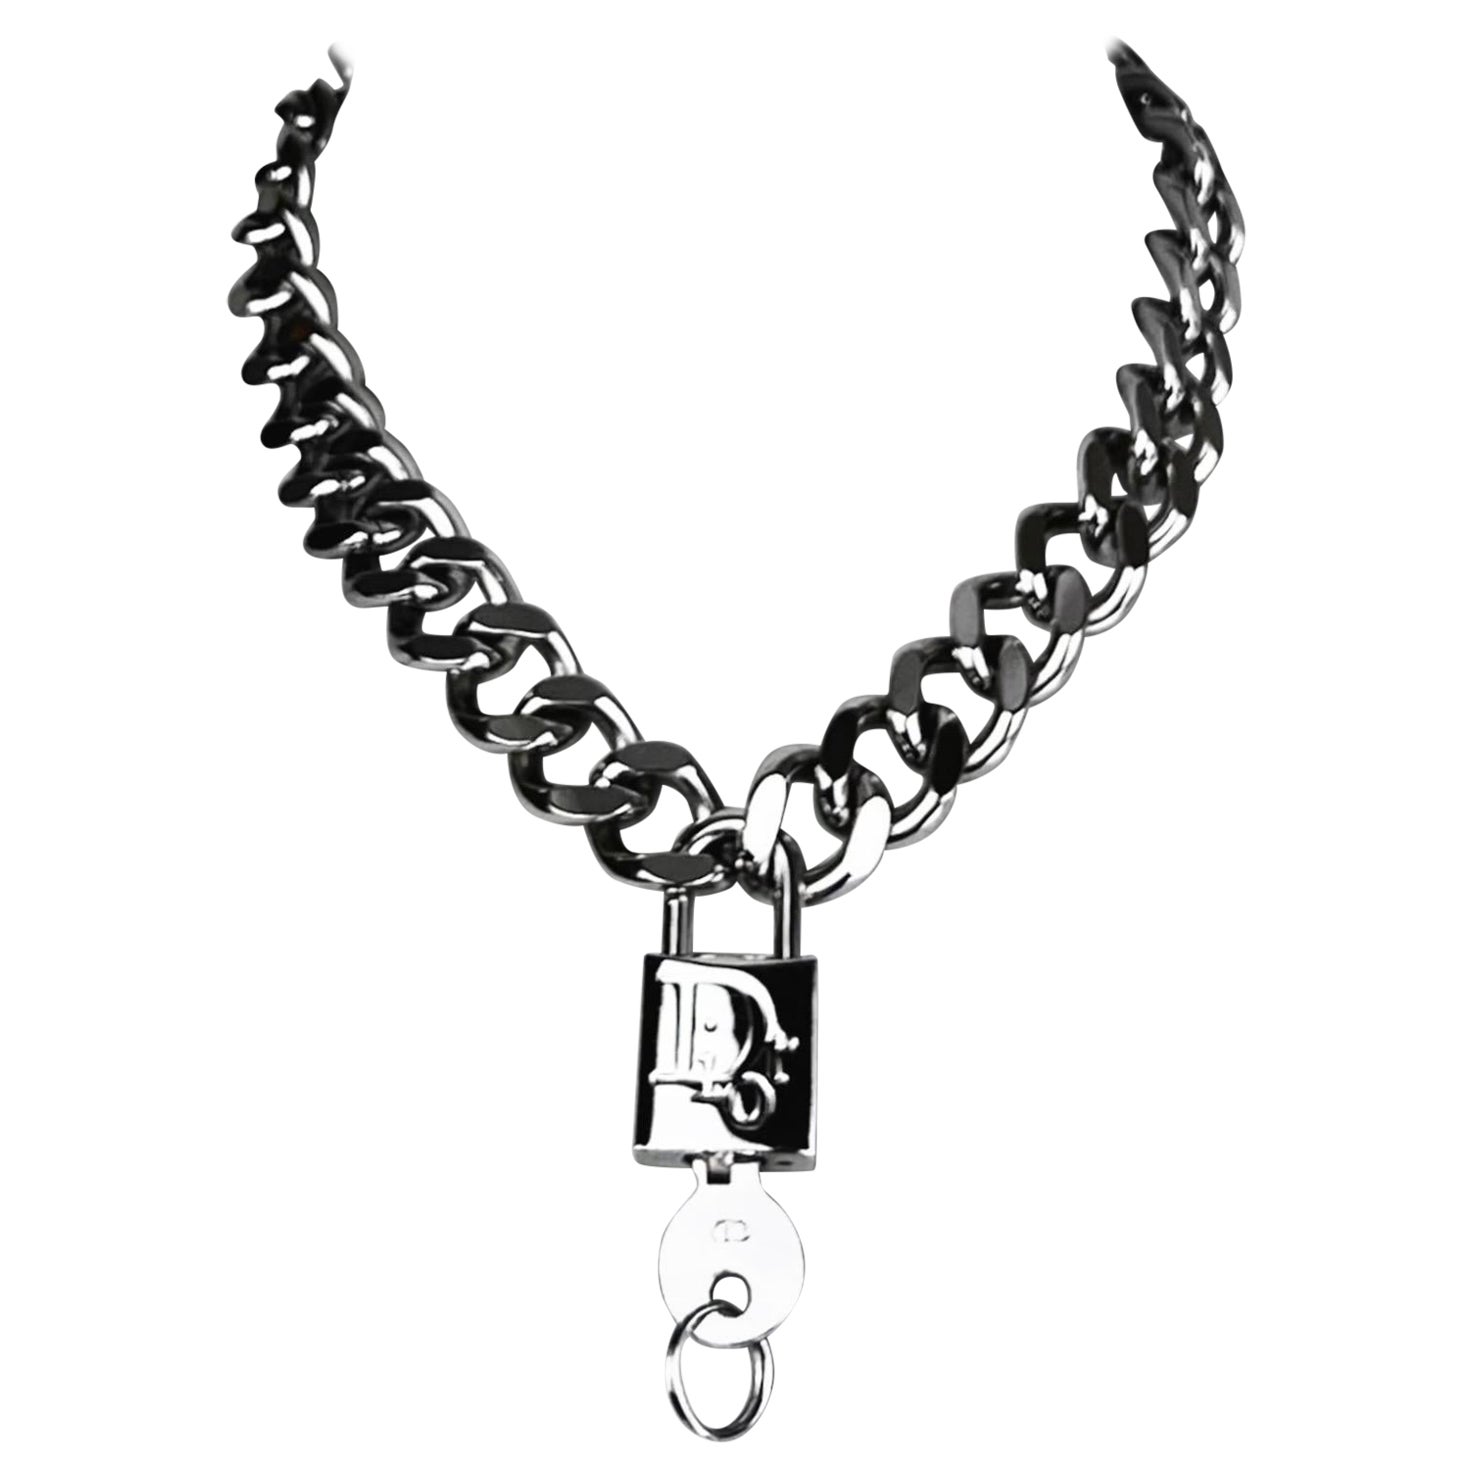 Dior by John Galliano Spring 2001 Haute Couture Show Logo Padlock Chain For Sale